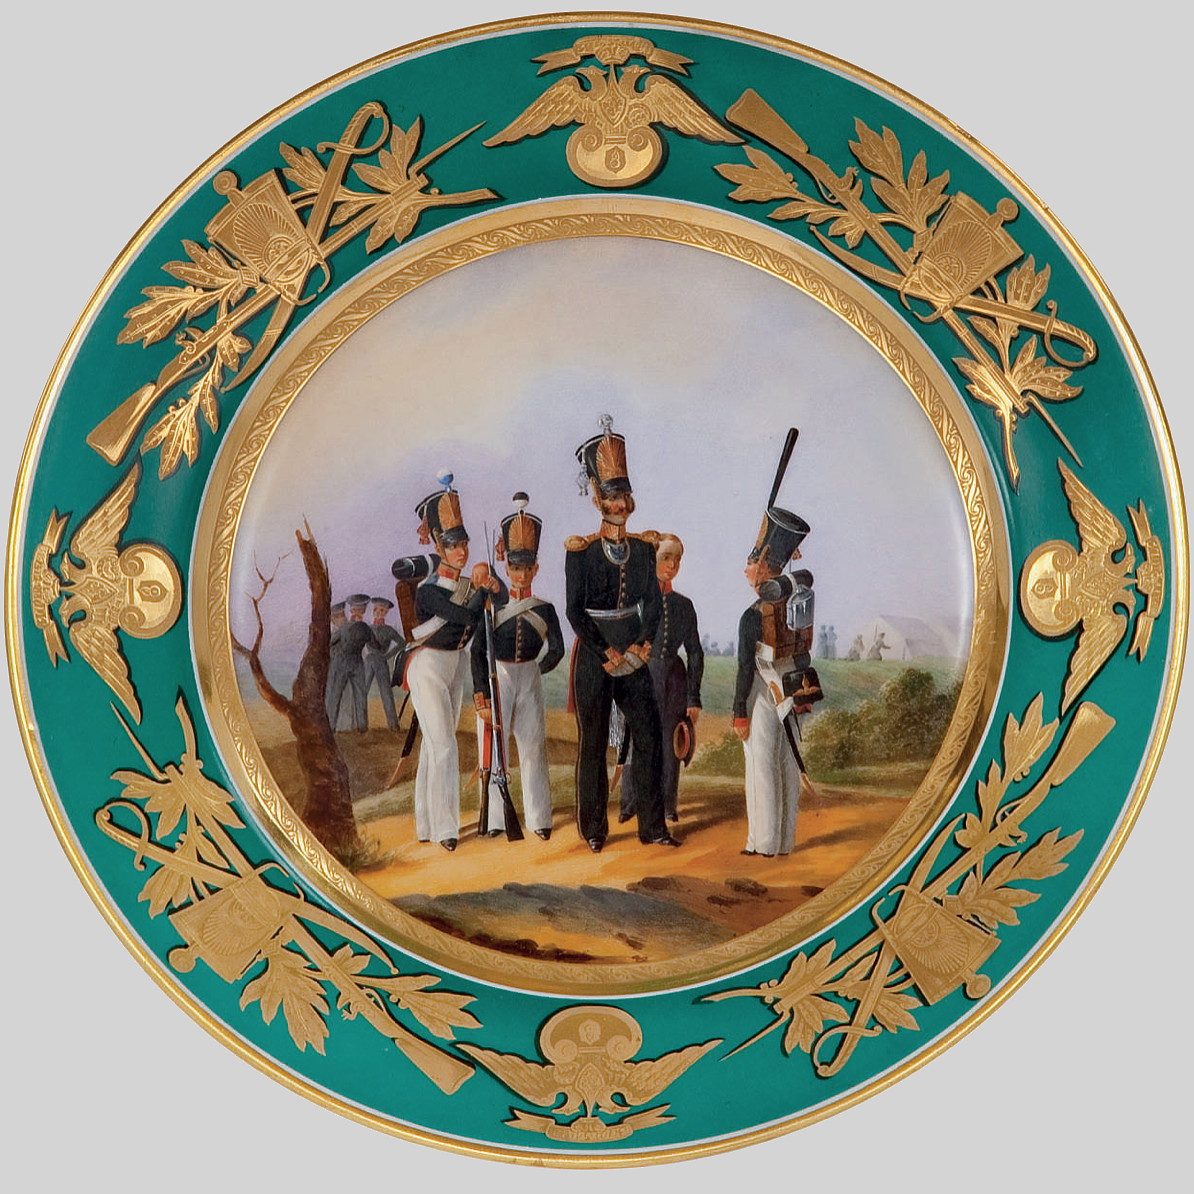 Russian Imperial Porcelain Factory military plate with turquoise border depicting officer and cadets